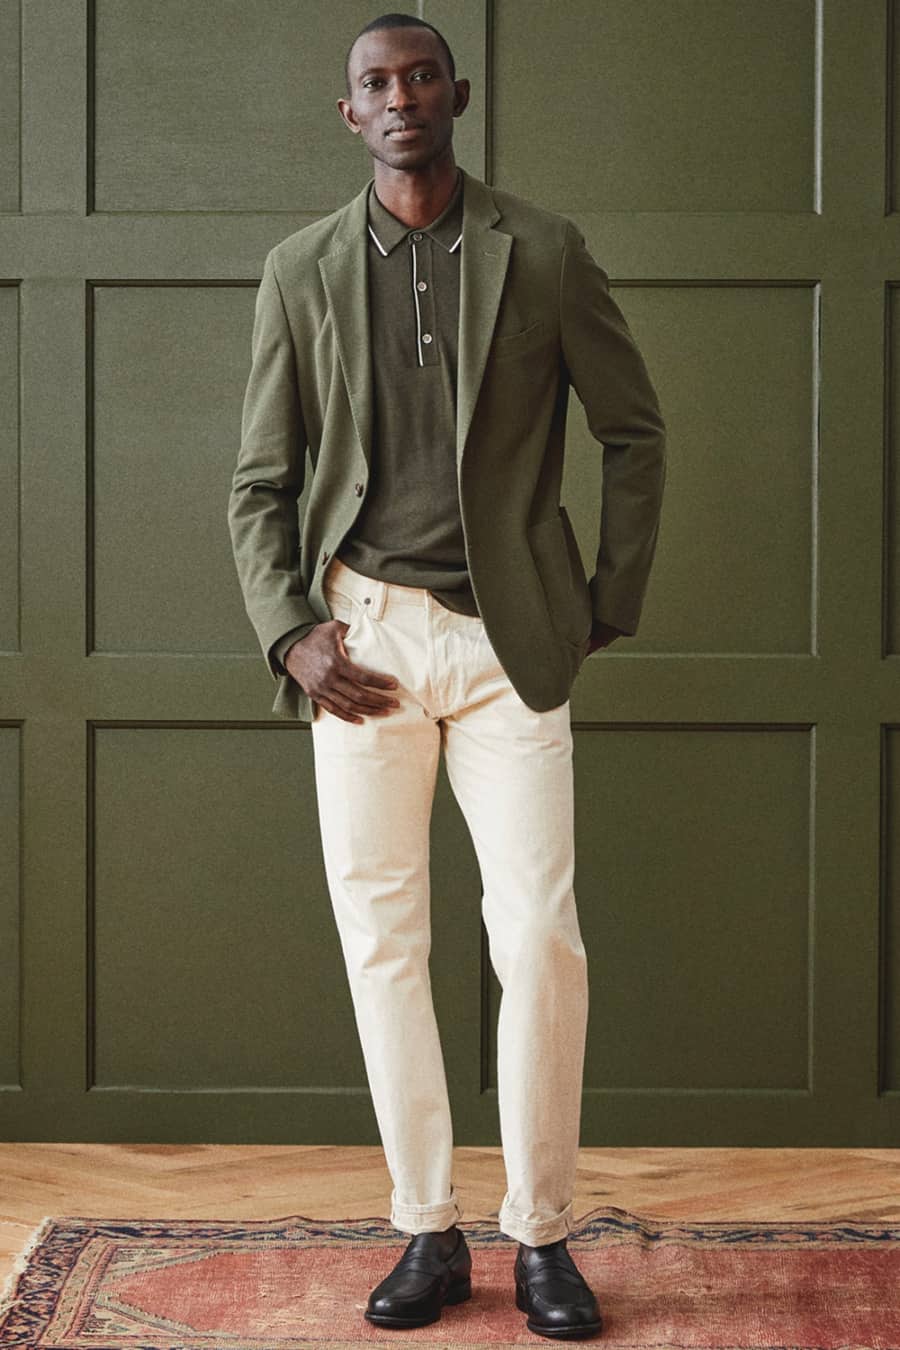 Men's white jeans, green polo shirt, green blazer and black loafers outfit